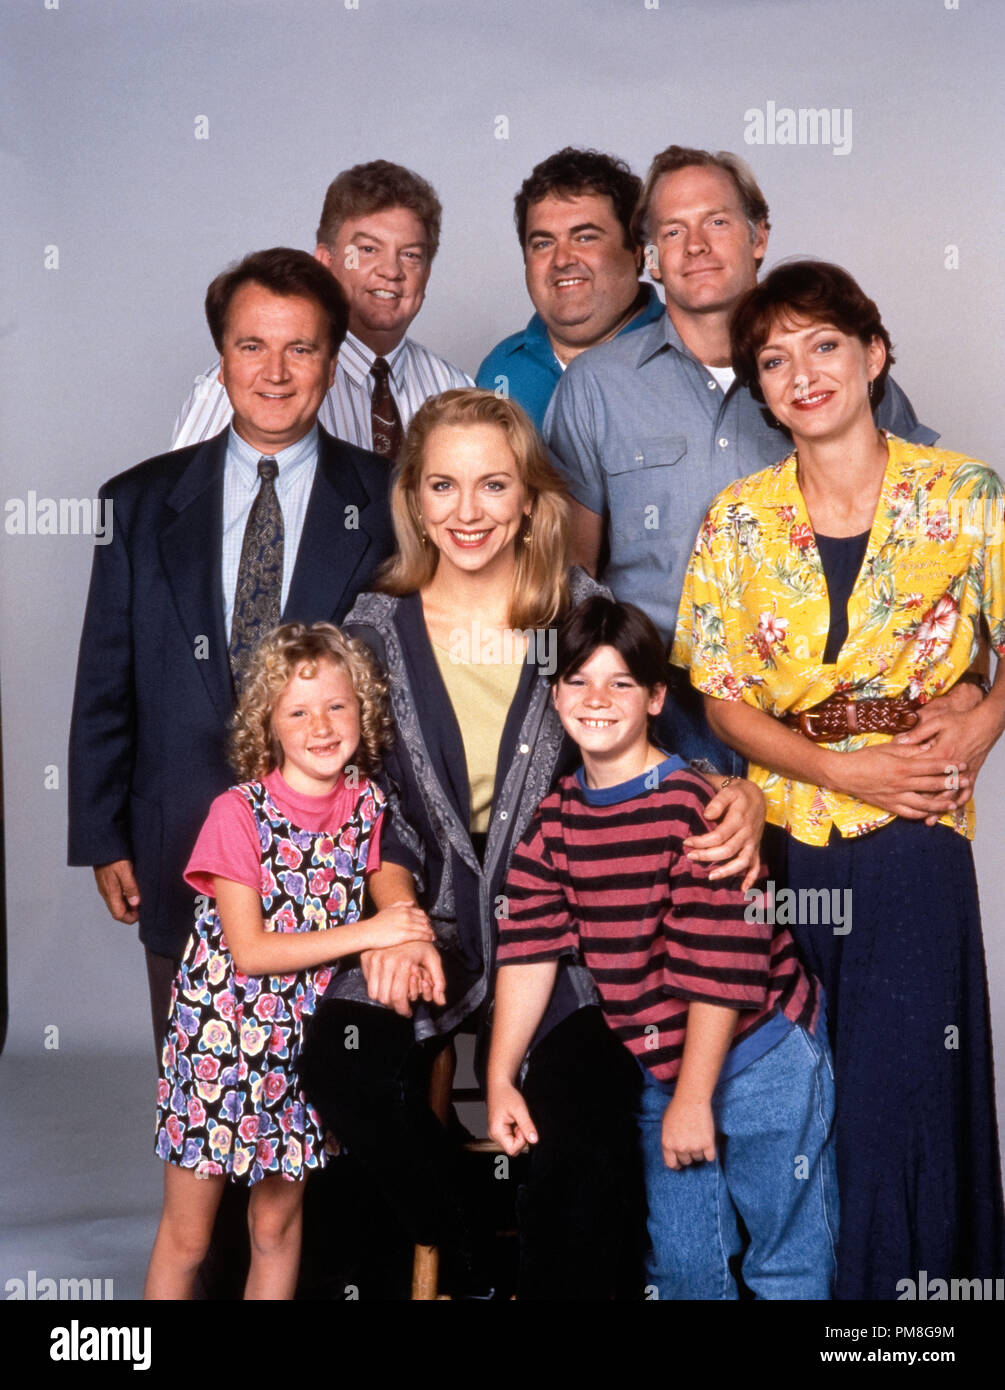 Film still / publicity still from "Grace Under Fire" Brett Butler, Dave Thomas, Julie White, Casey Sander, Jon Paul Steuer, Kaitlin Cullum, Charles Hallahan, Walter Olkewicz 1993   File Reference # 31371296THA  For Editorial Use Only All Rights Reserved Stock Photo